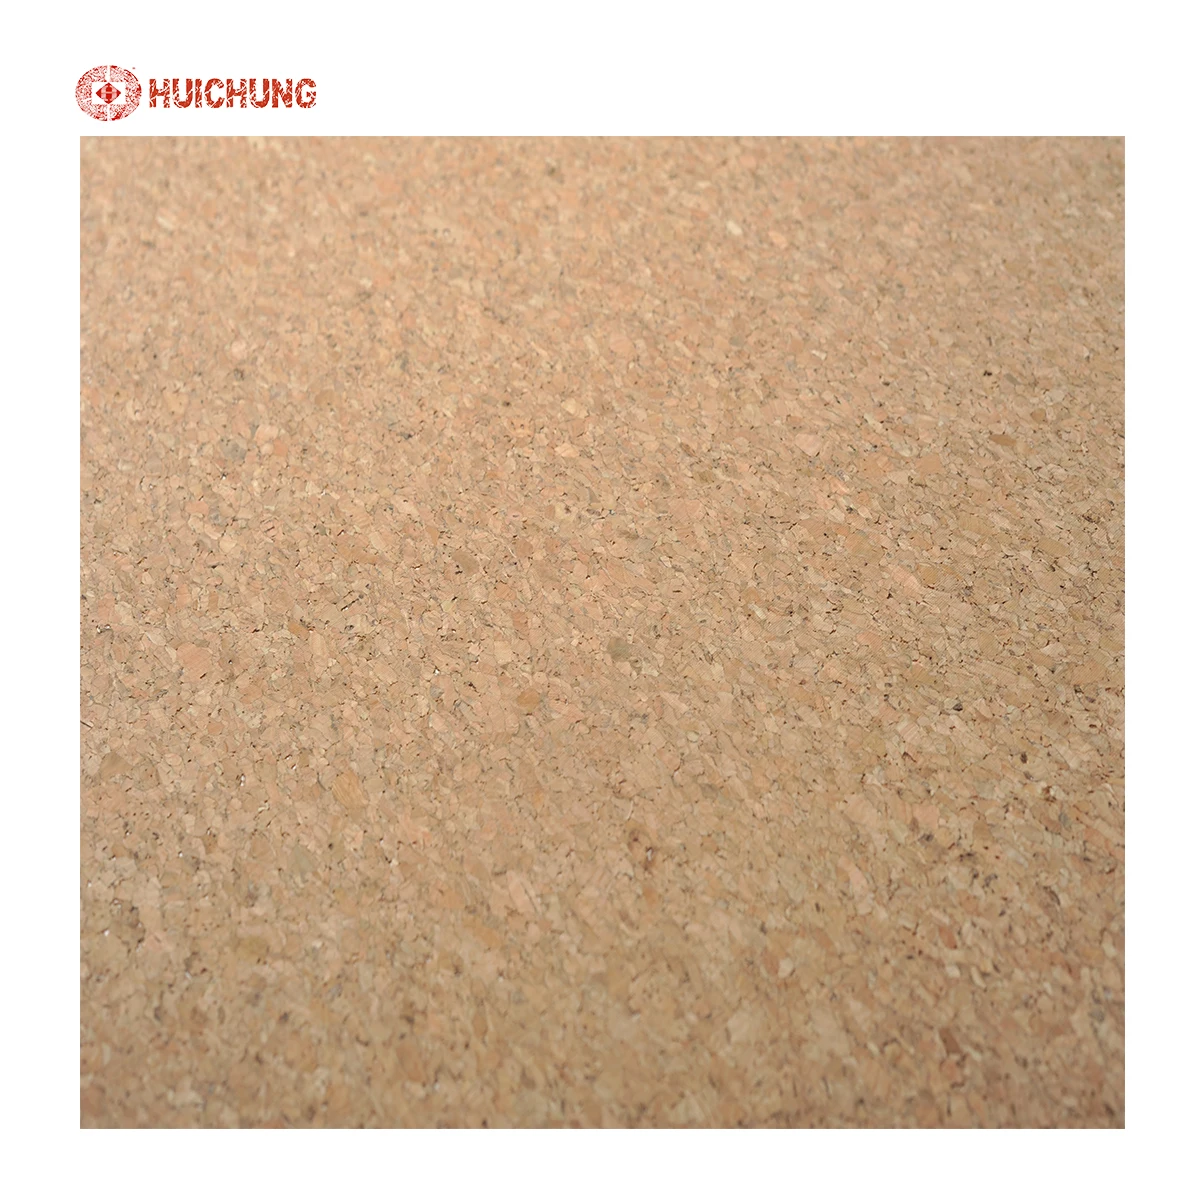 Ready to ship high quality natural cork leather for shoes cork mat yoga mat bags sleeve sheet board coaster